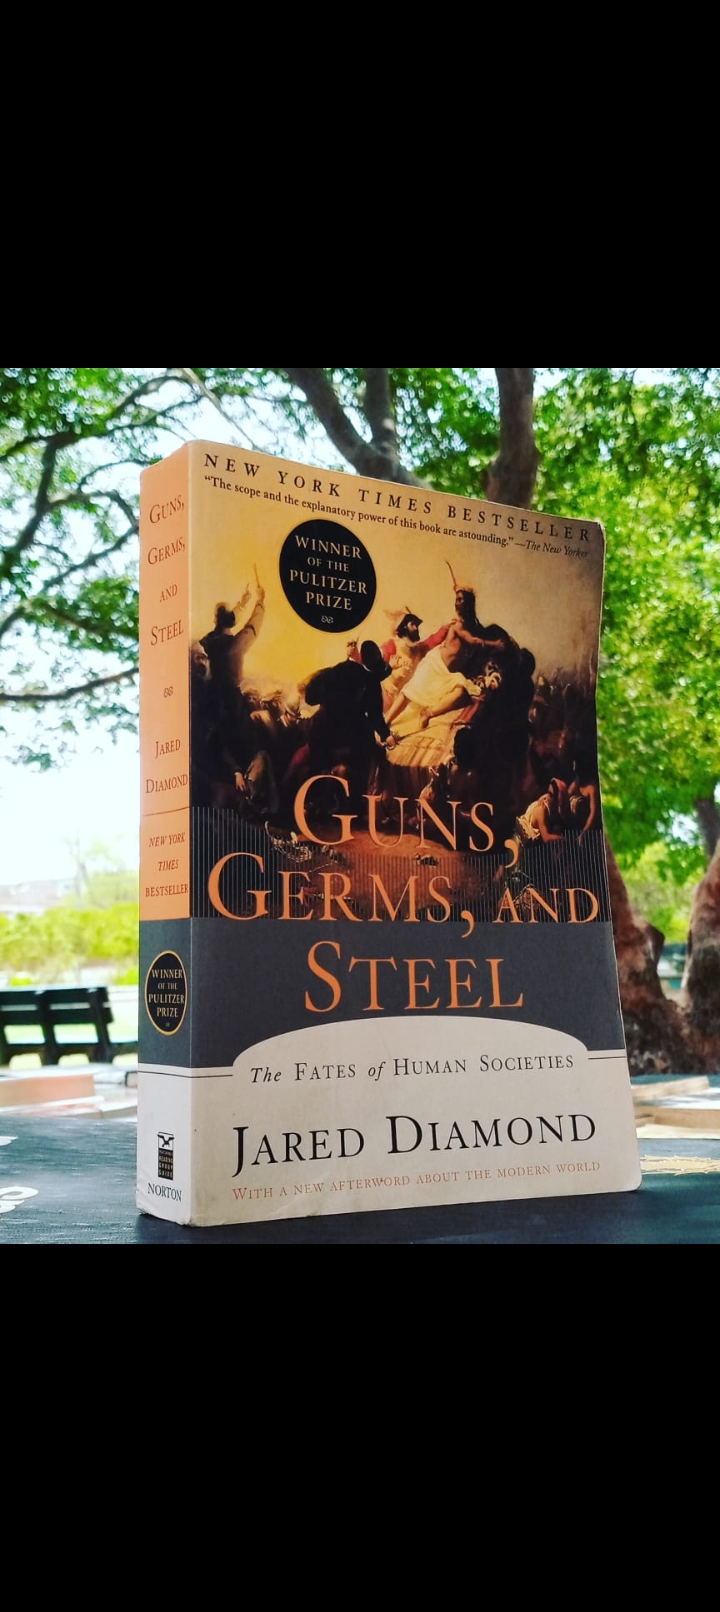 guns, germs, and steel the fates of human societies by jared diamond. original paperback large size